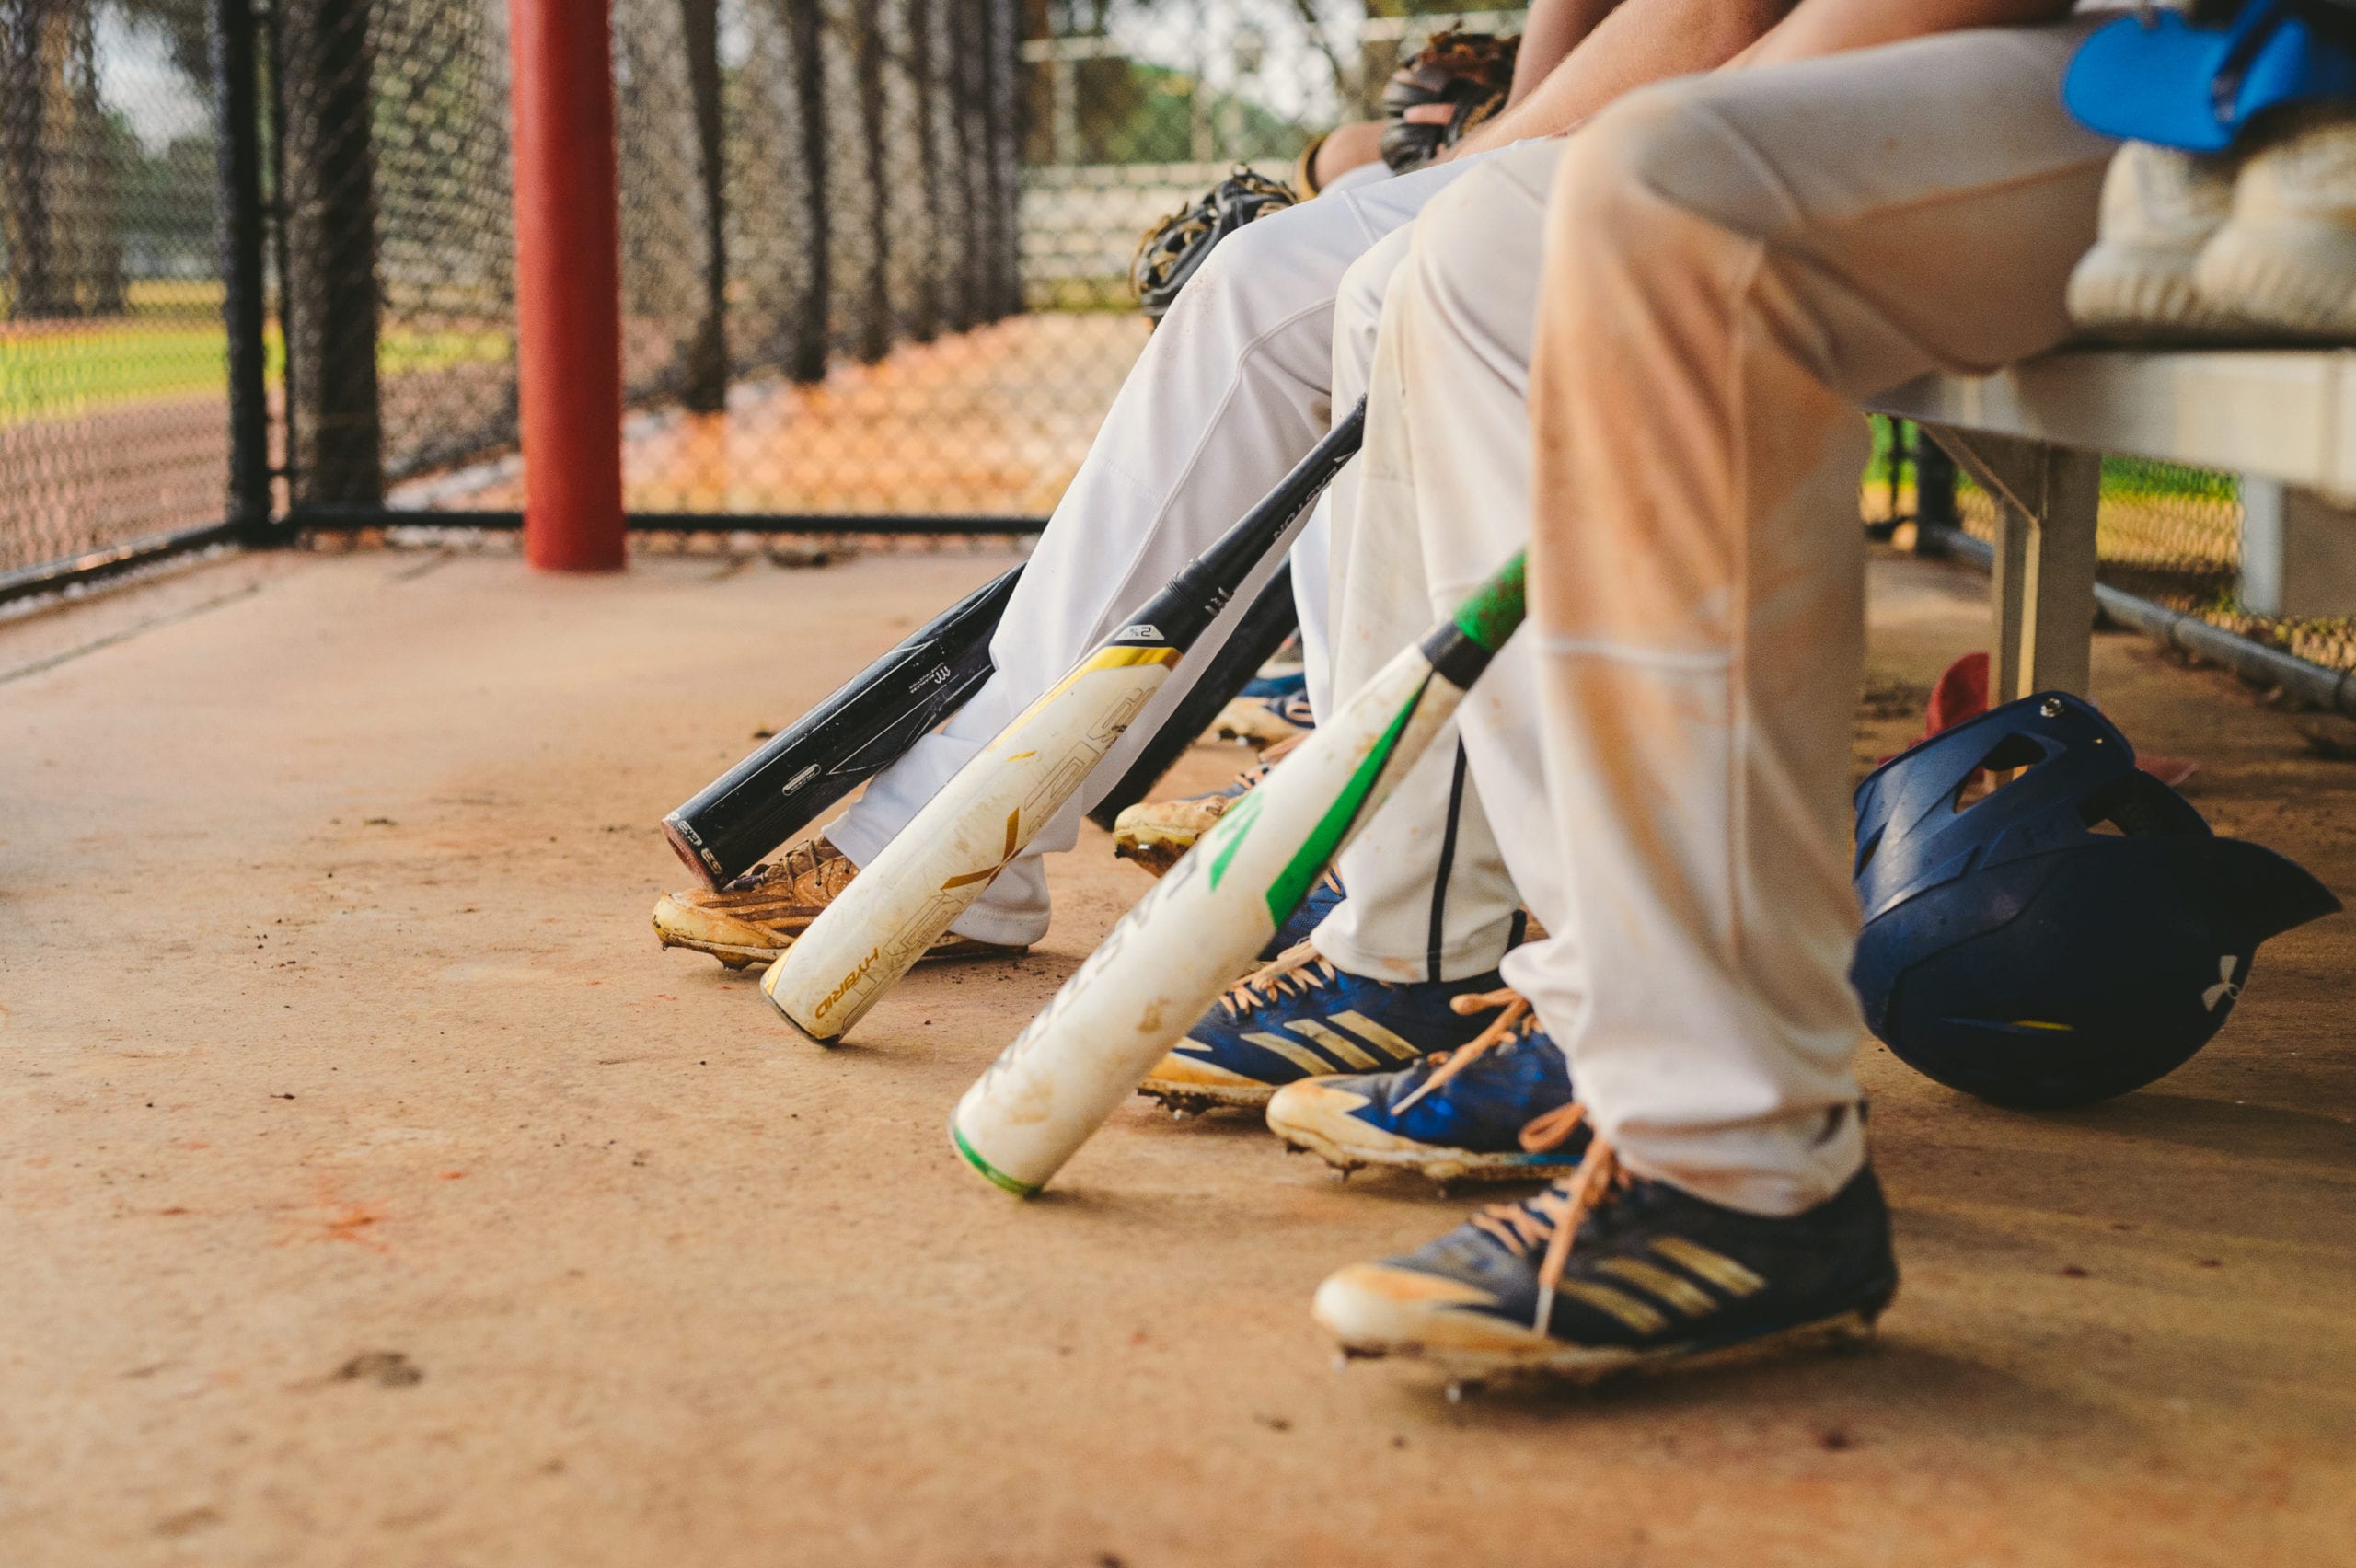 Closeup of lower halves of young baseball players wearing cleats holding bats while sitting on the bench